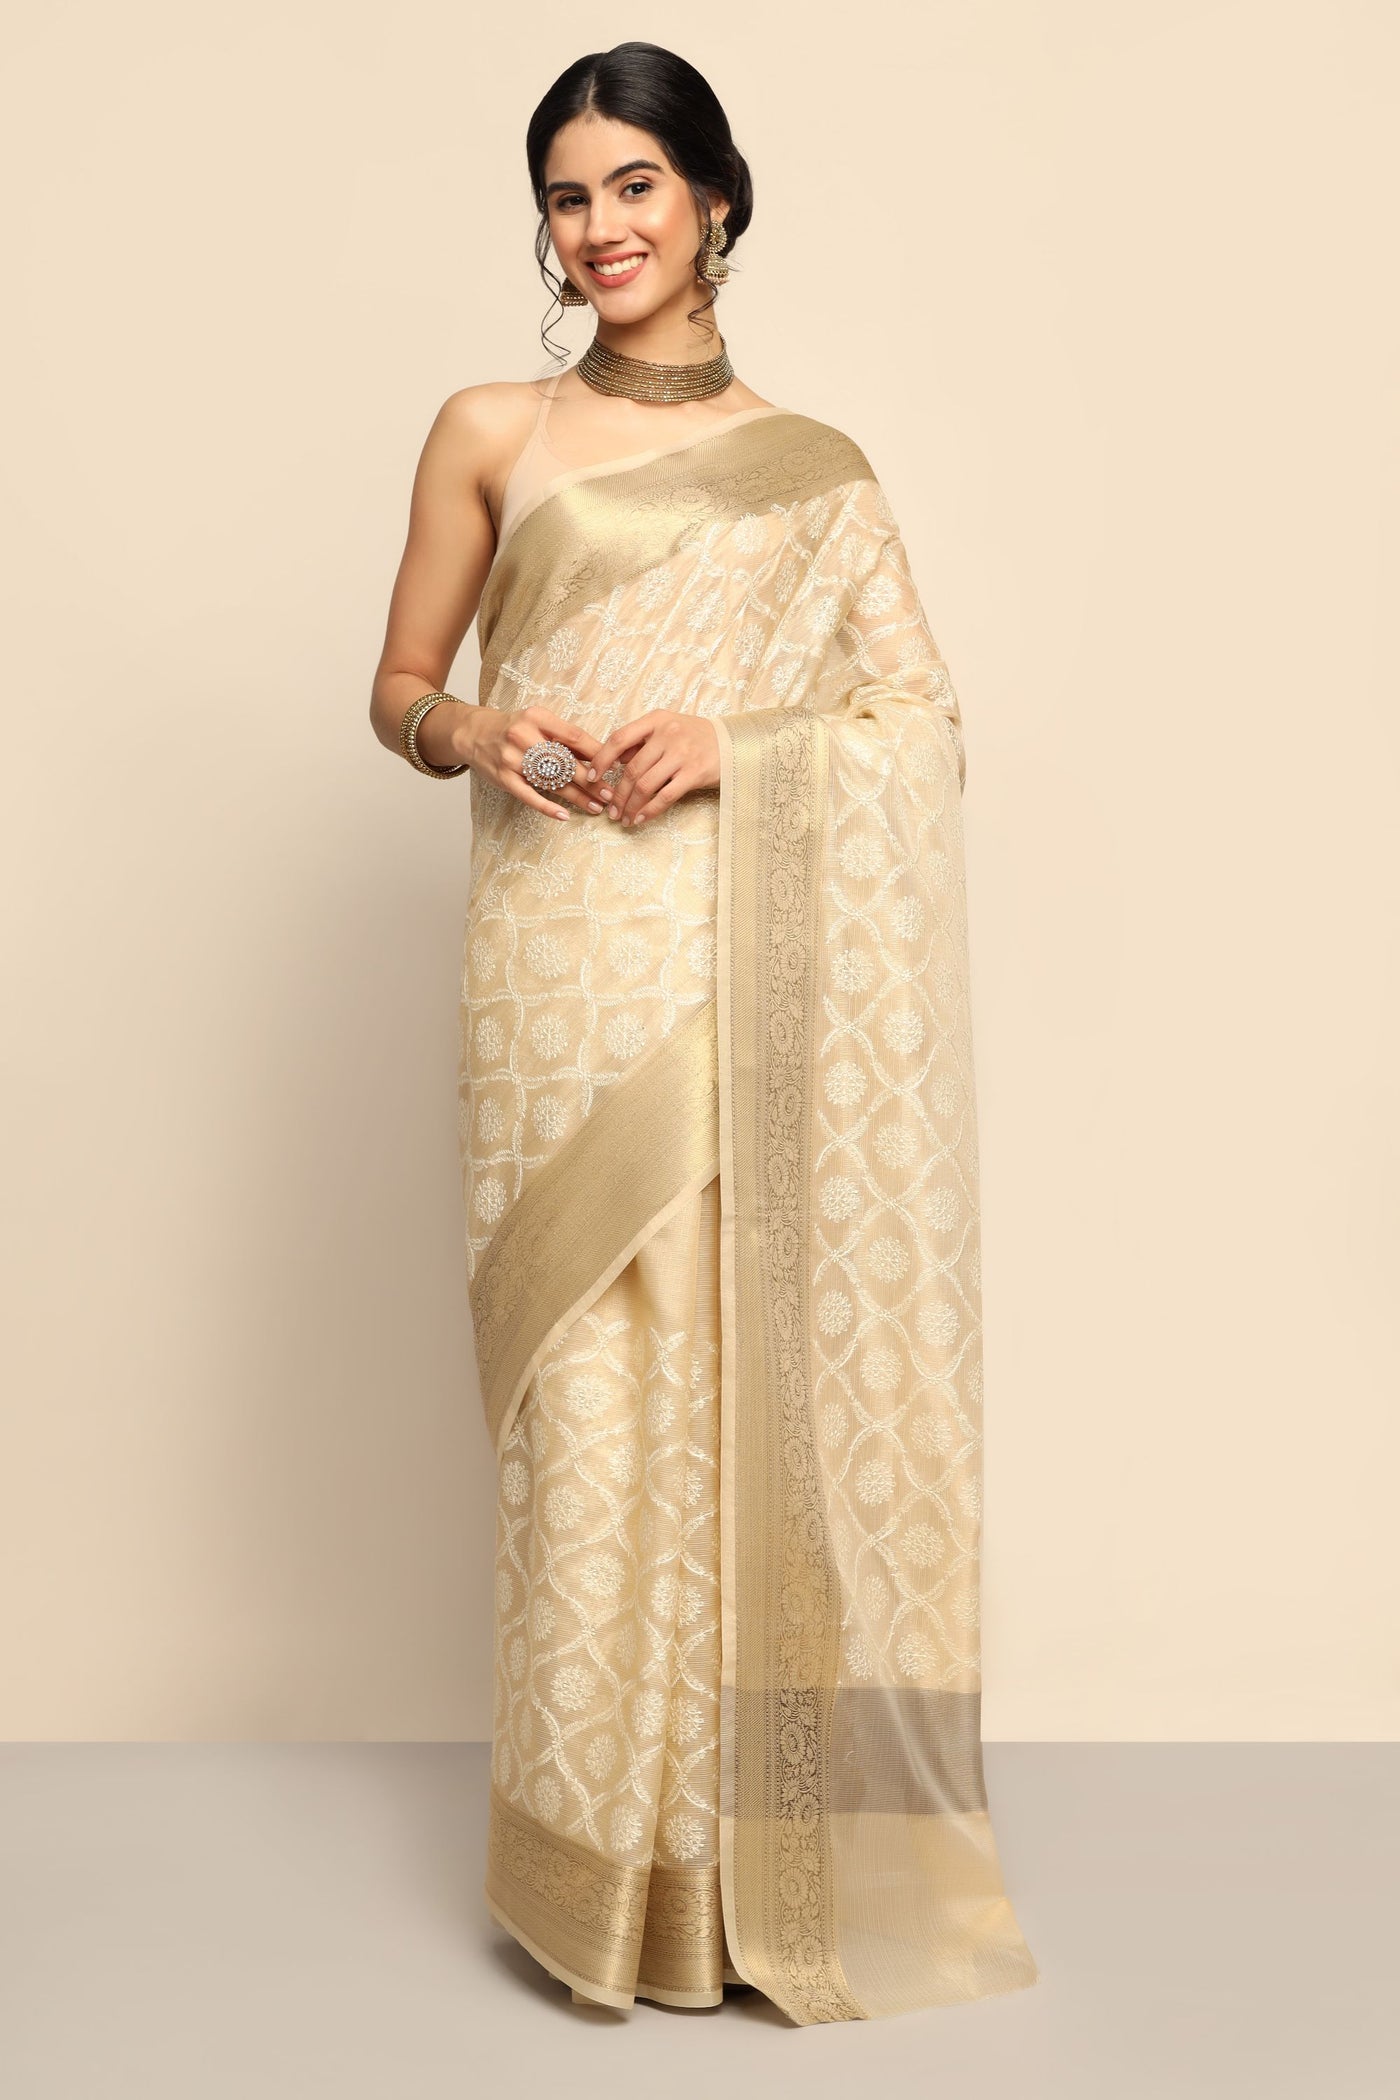 Enchanting Cream Cotton Silk Saree: A Blend of Comfort and Sophistication